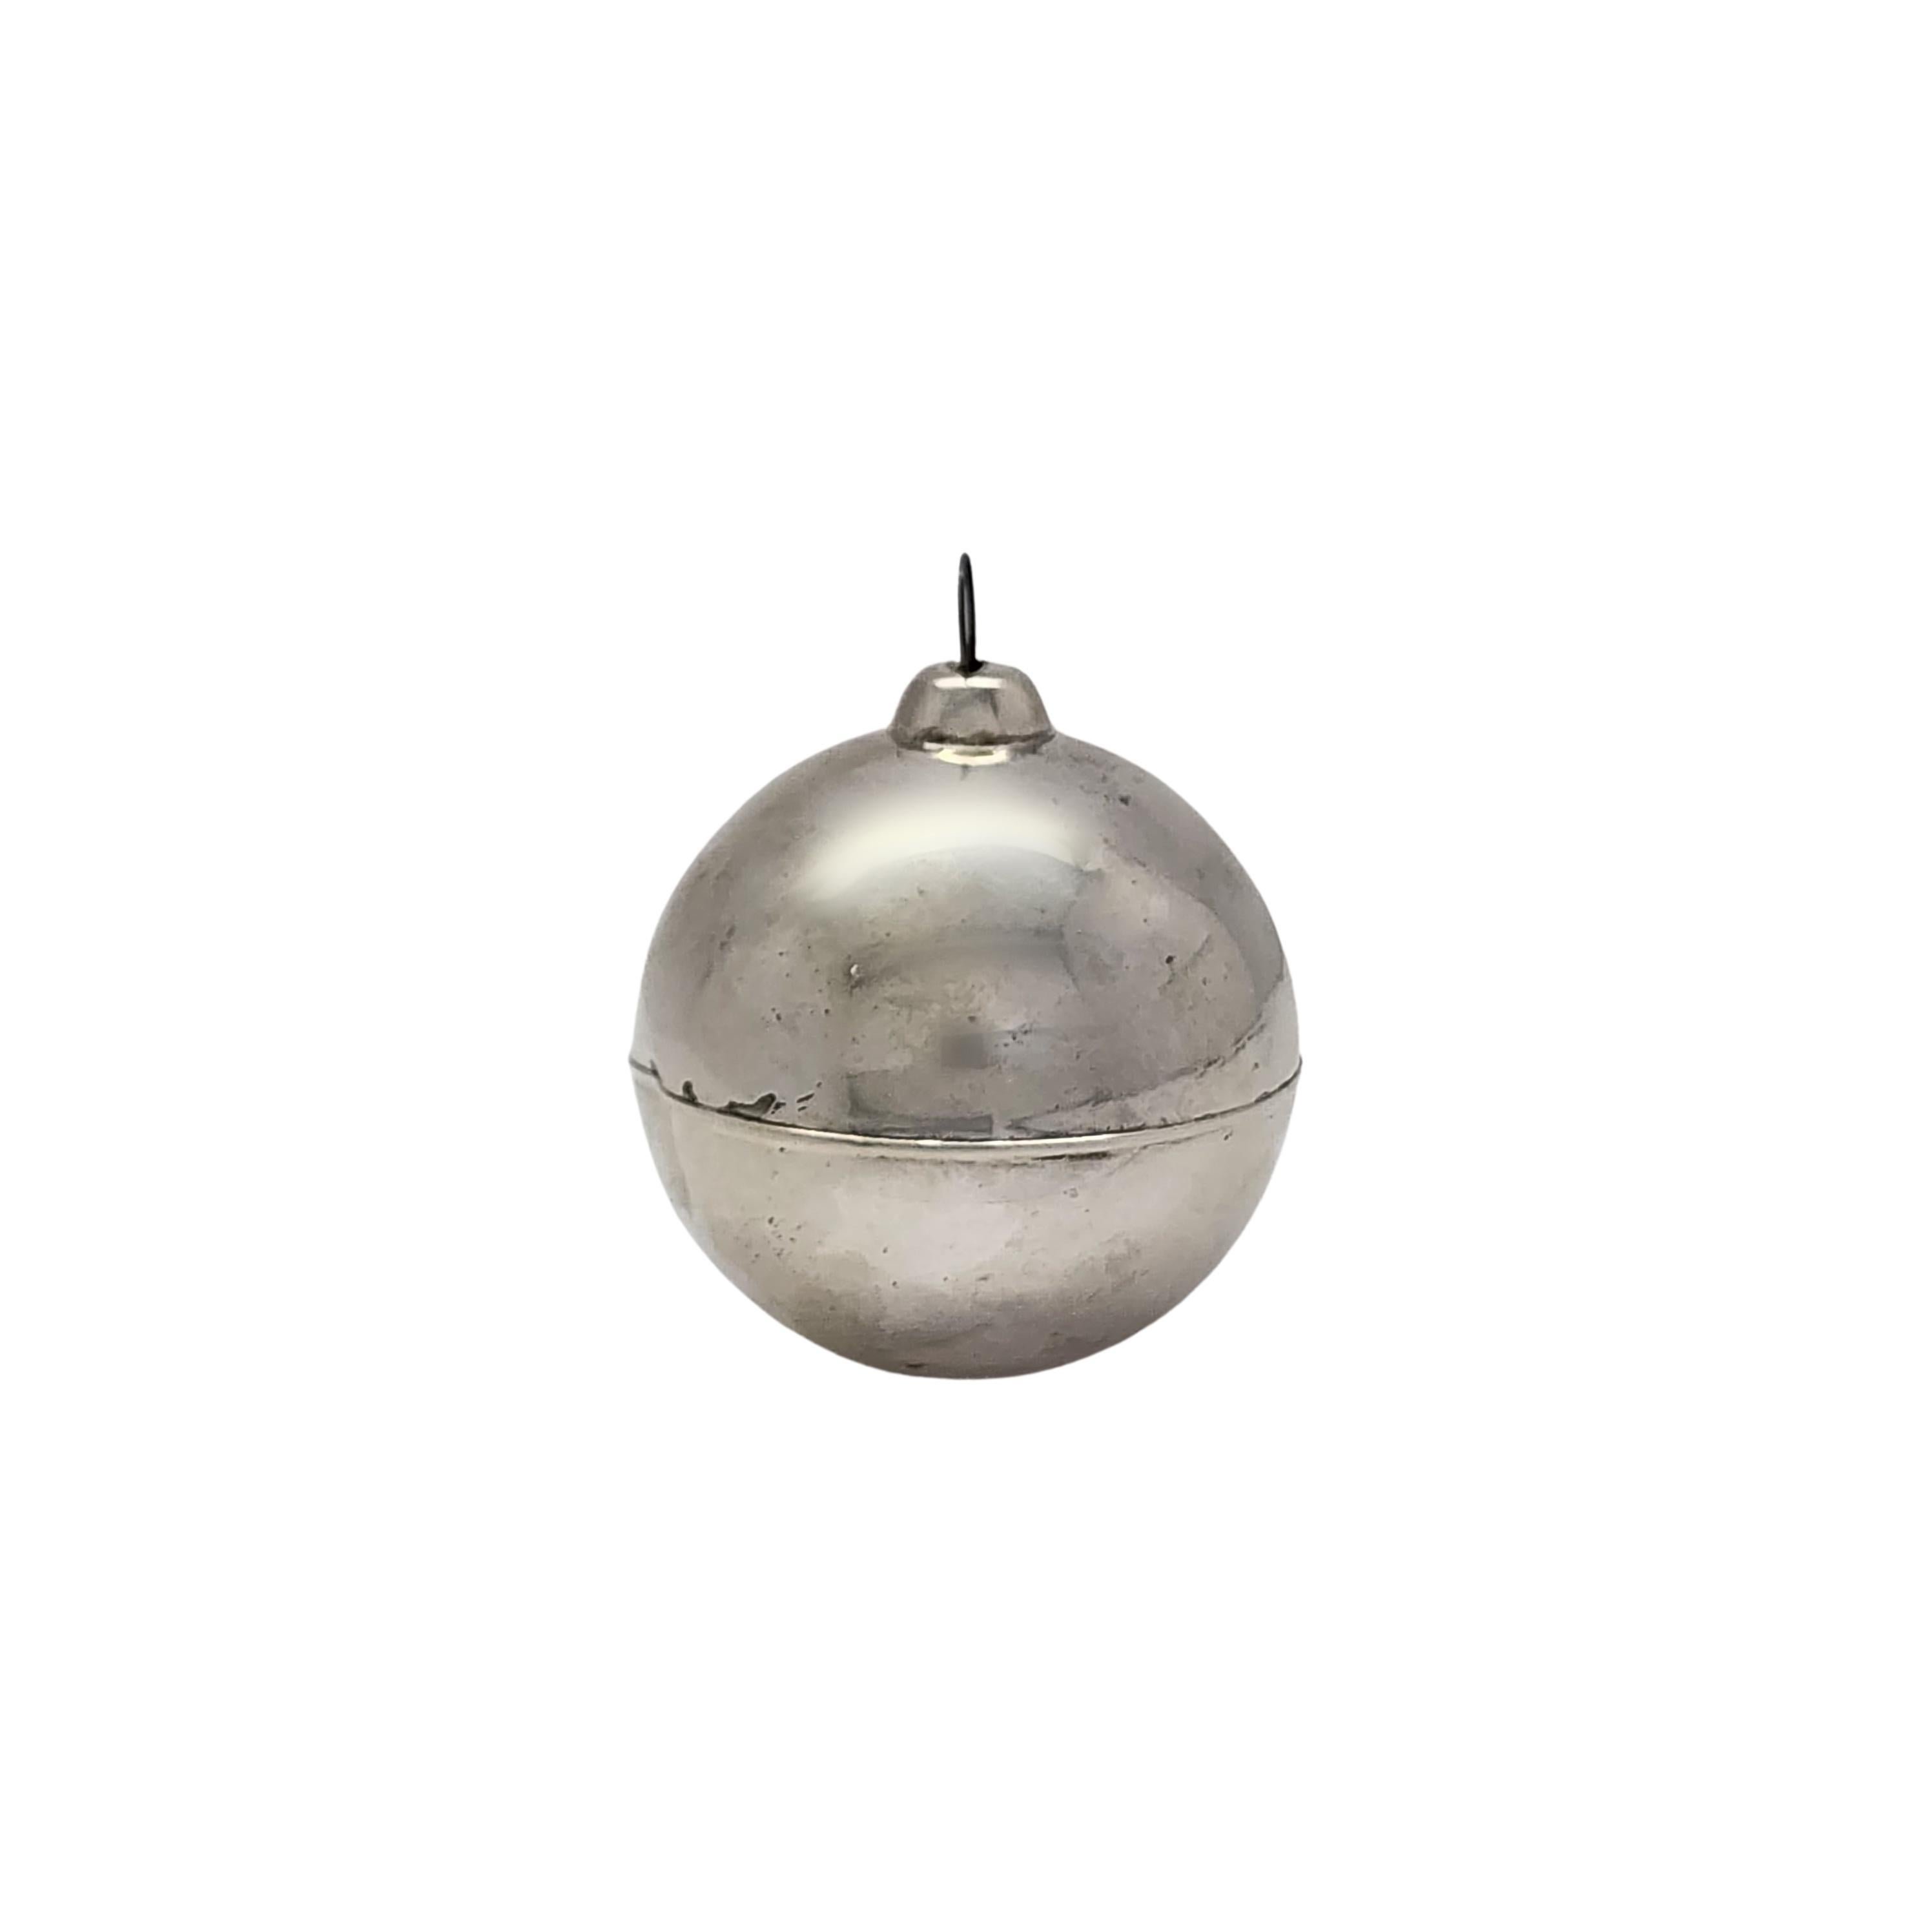 Women's or Men's Towle Sterling Silver Ball Christmas Tree Ornament #15739